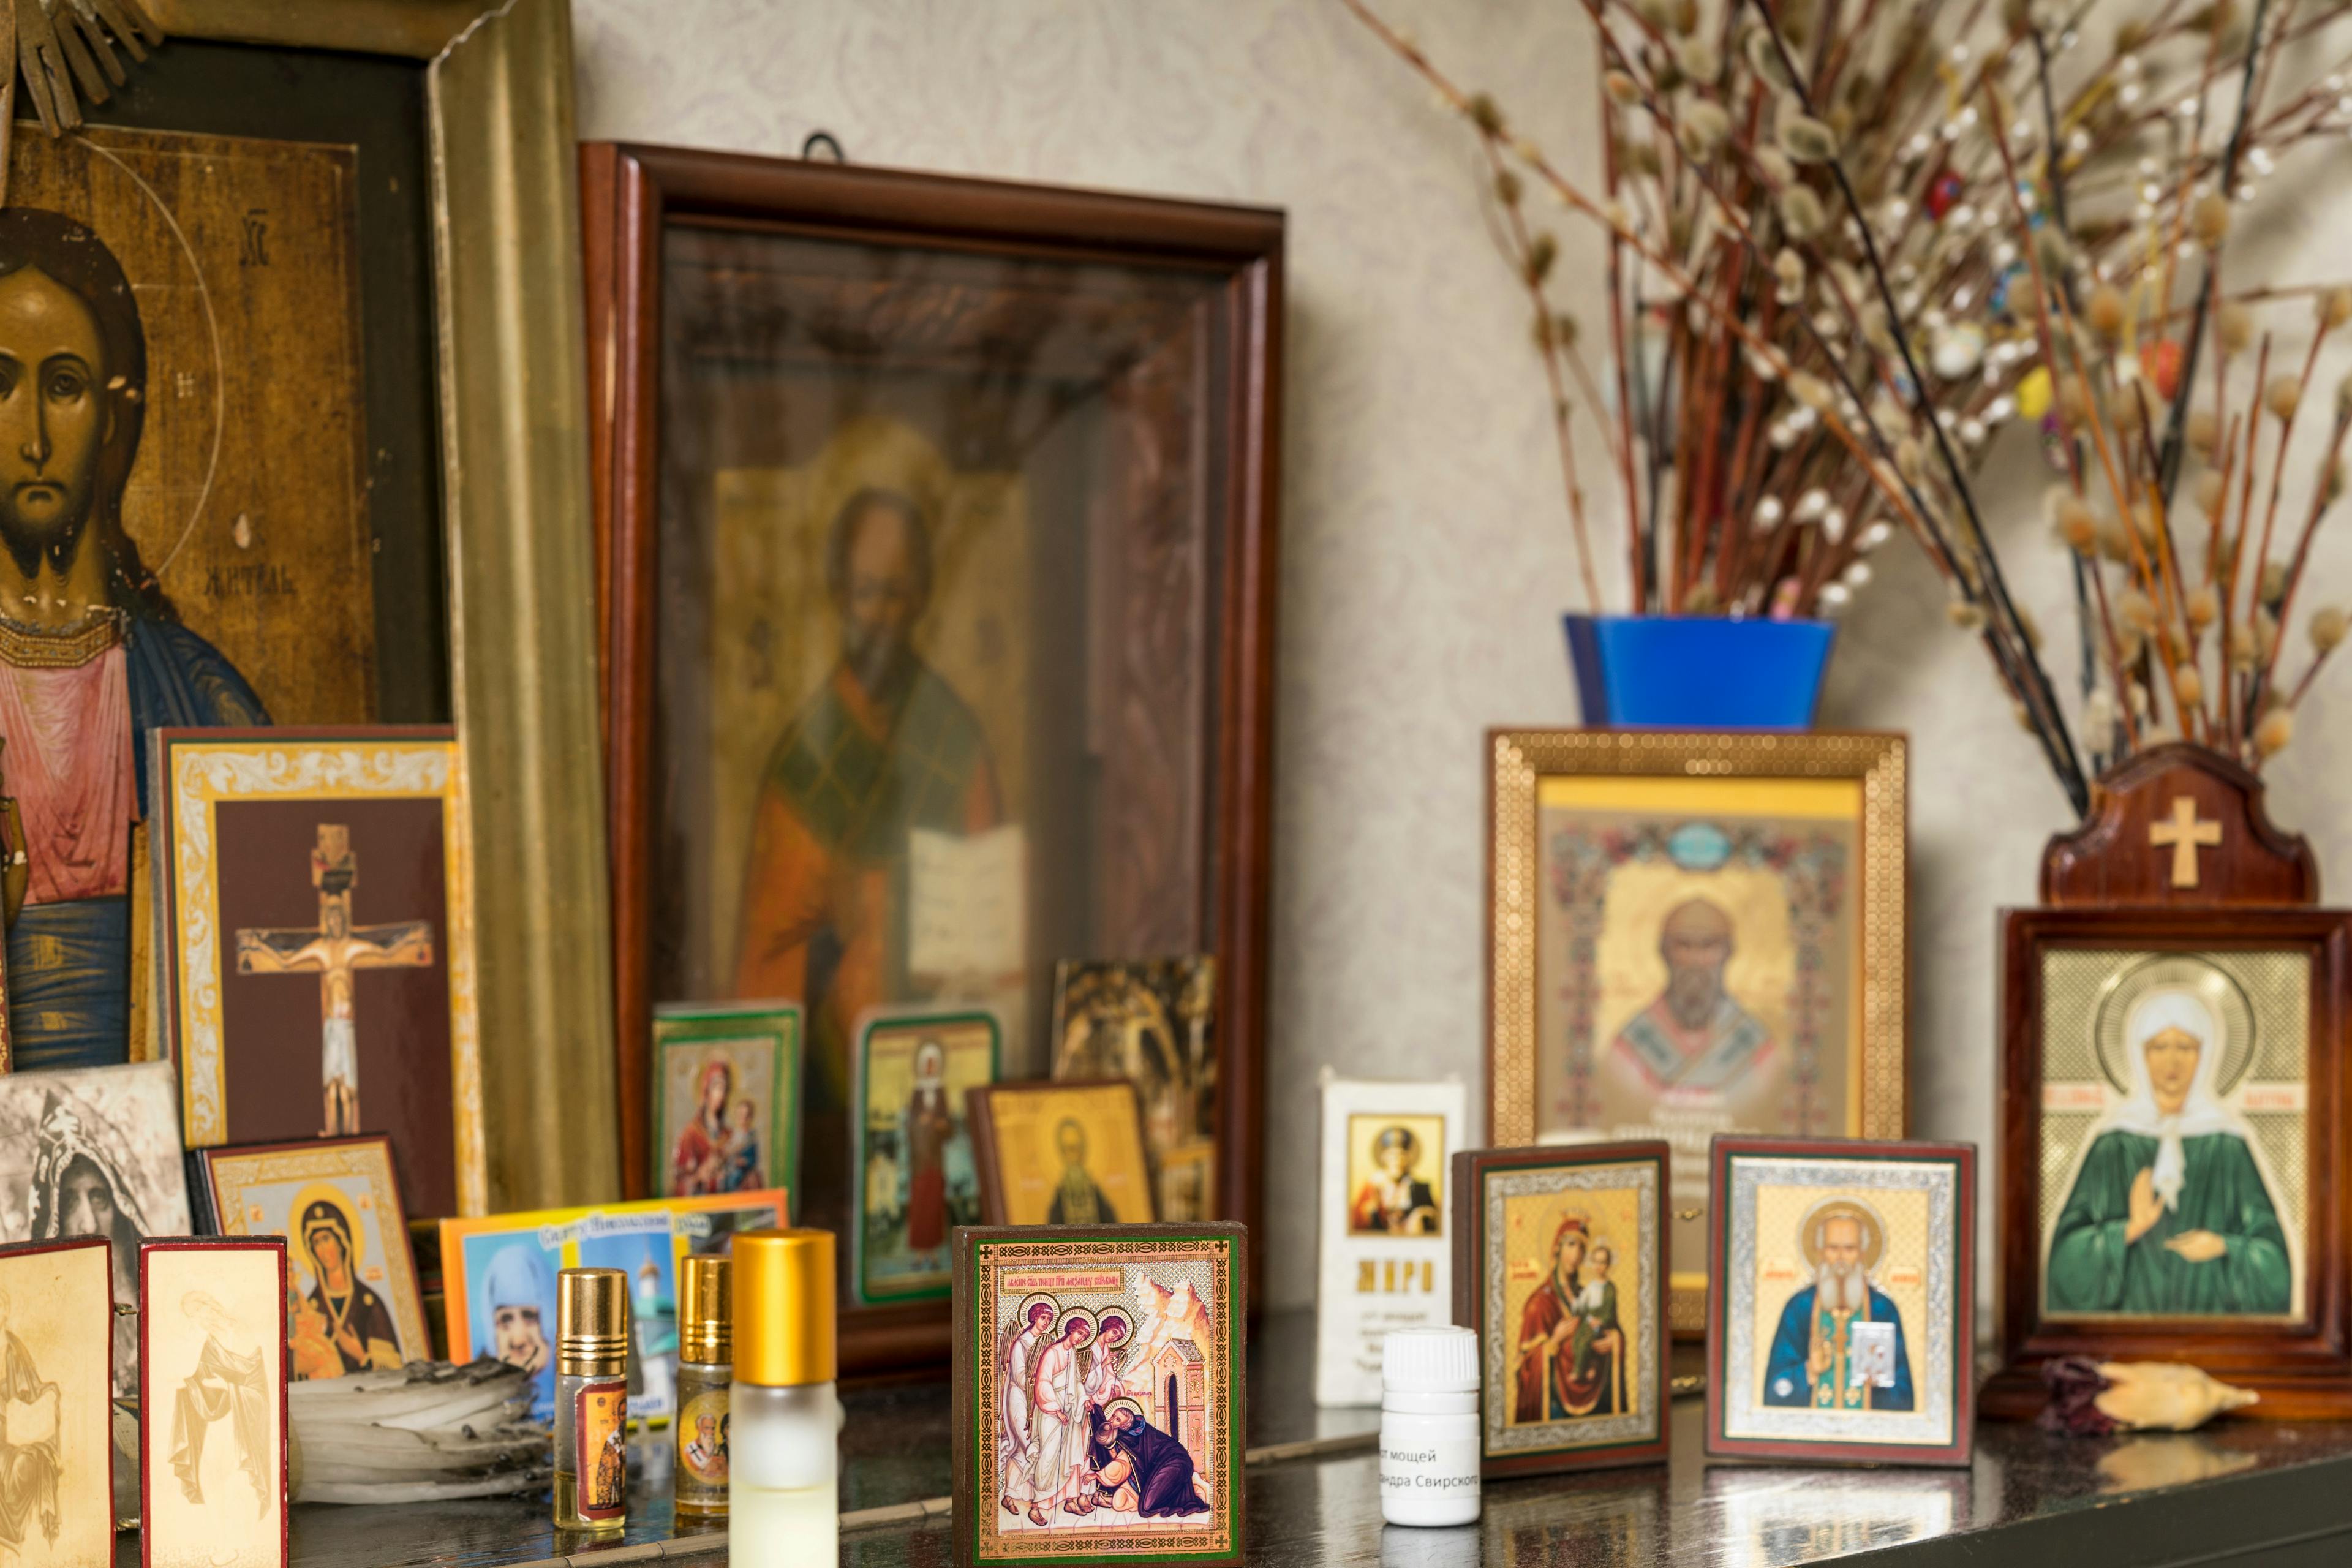 5 Items you should have in your home prayer space (and where to get them)